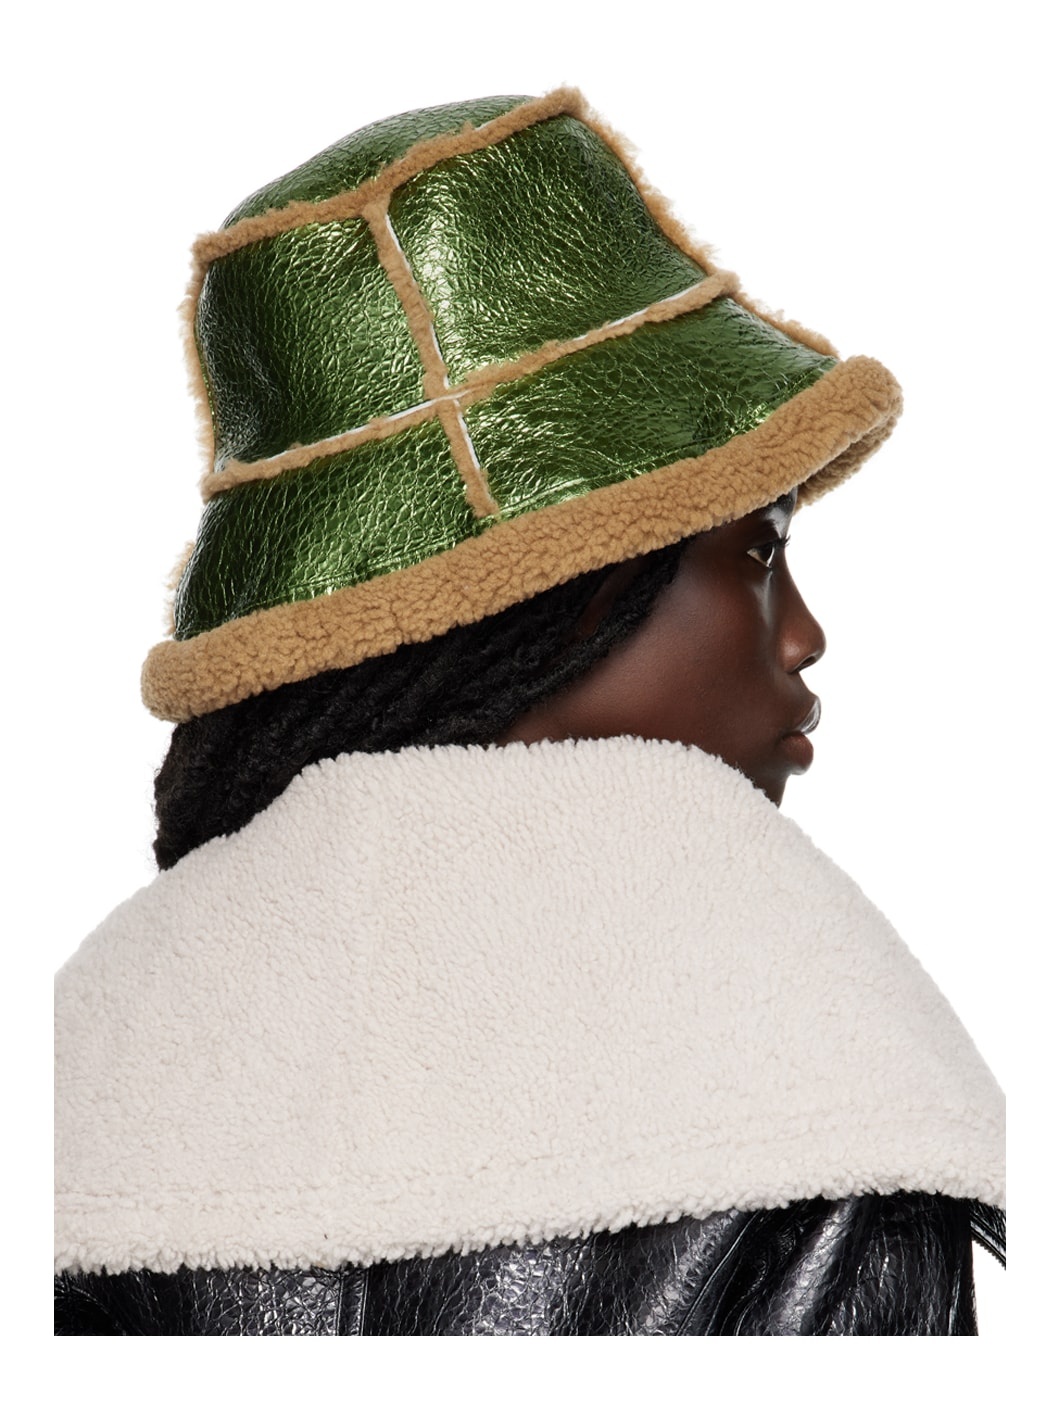 Green 'The Laminated' Bucket Hat - 3